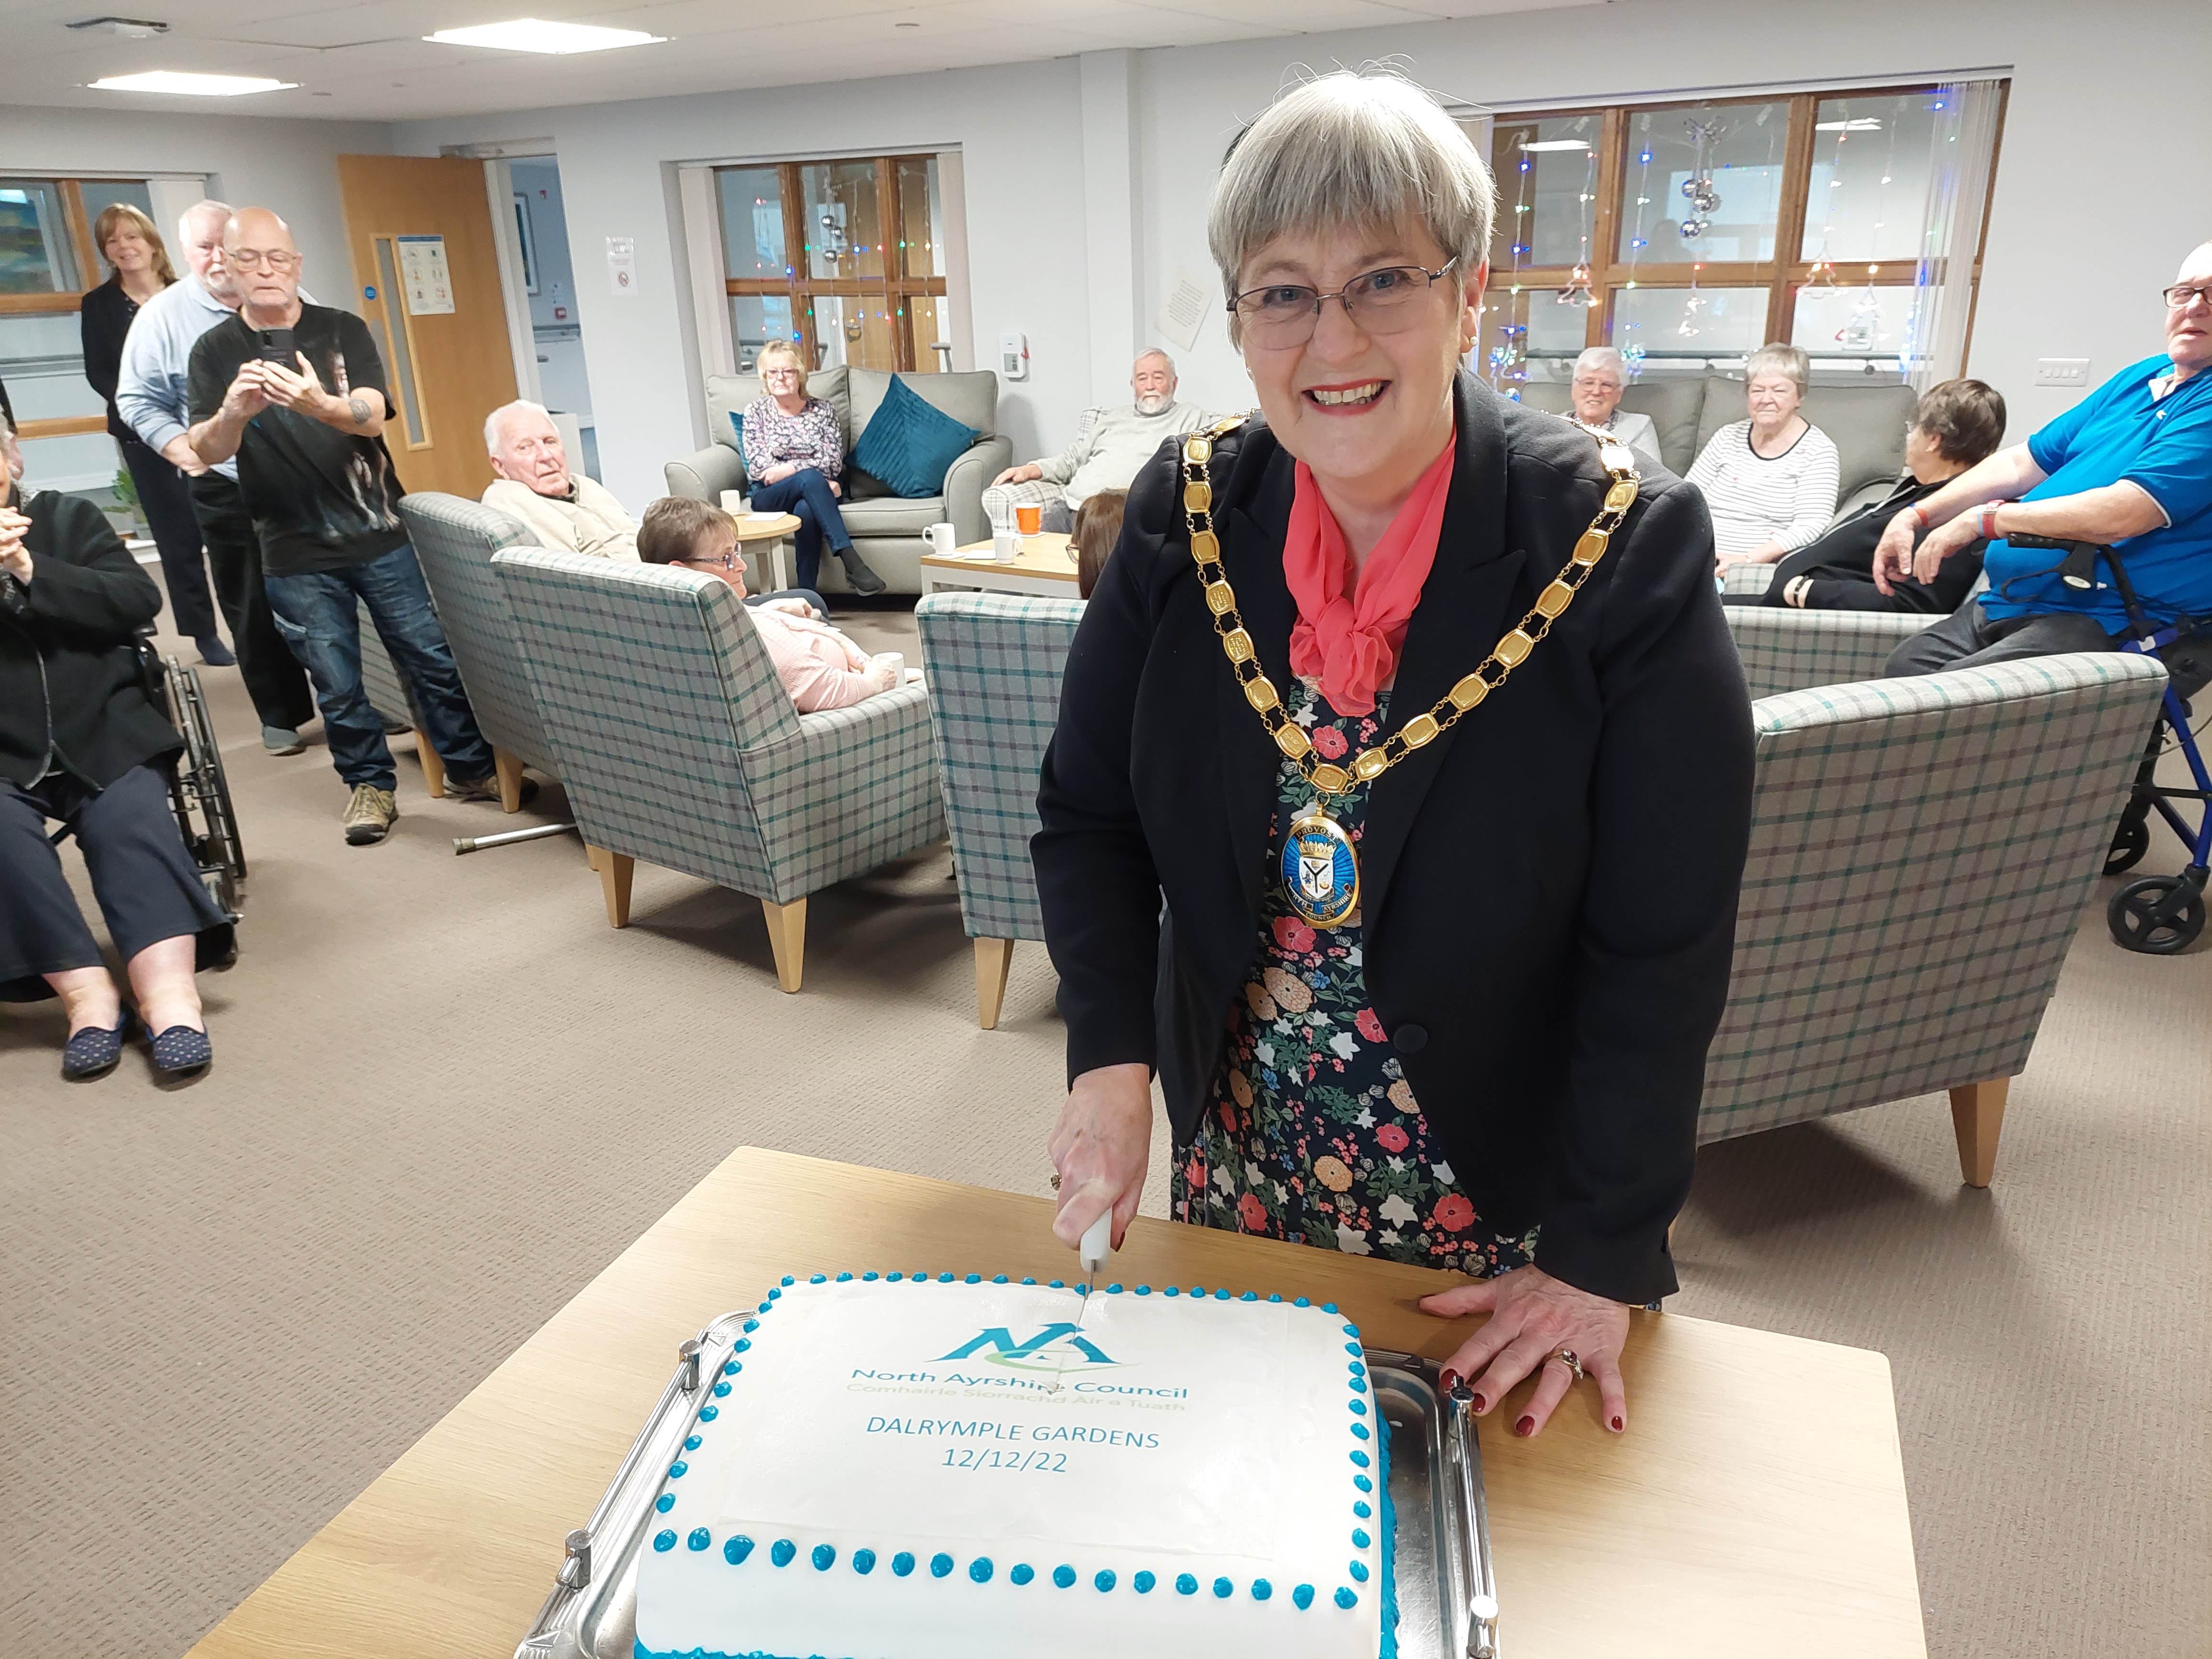 Dalrymple Gardens sheltered accommodation officially opens in Irvine